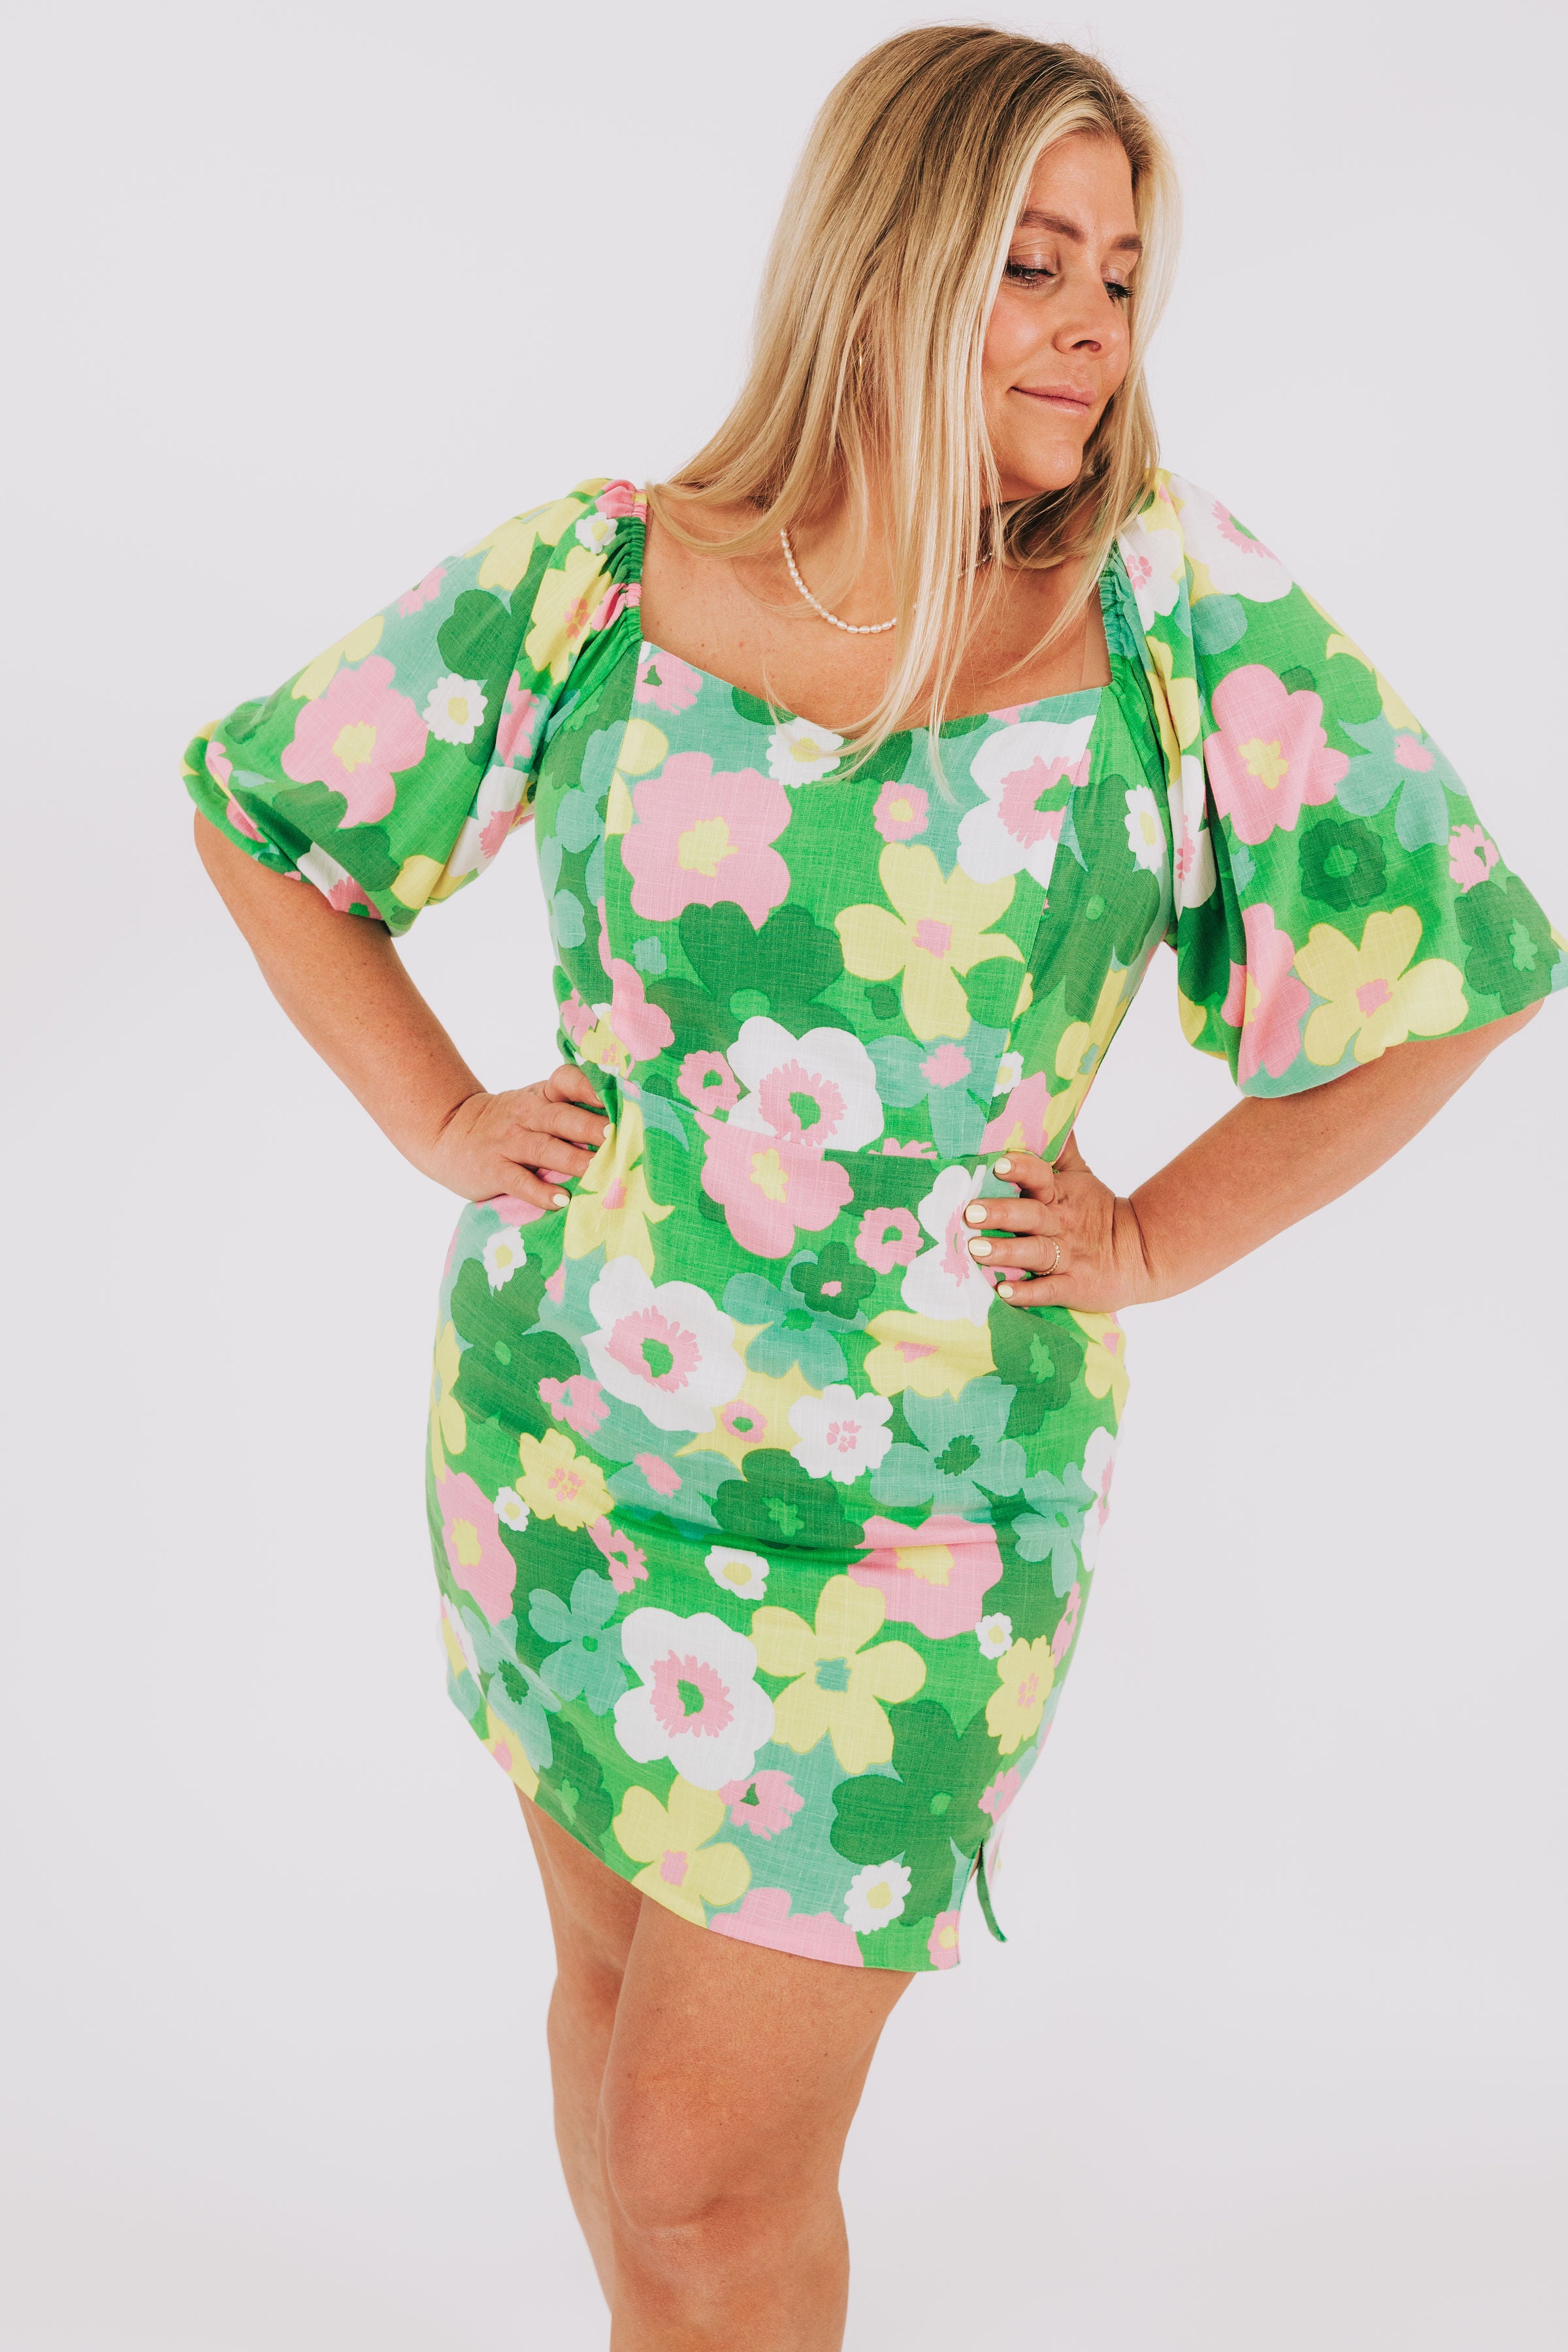 PLUS SIZE - Forget About It Dress